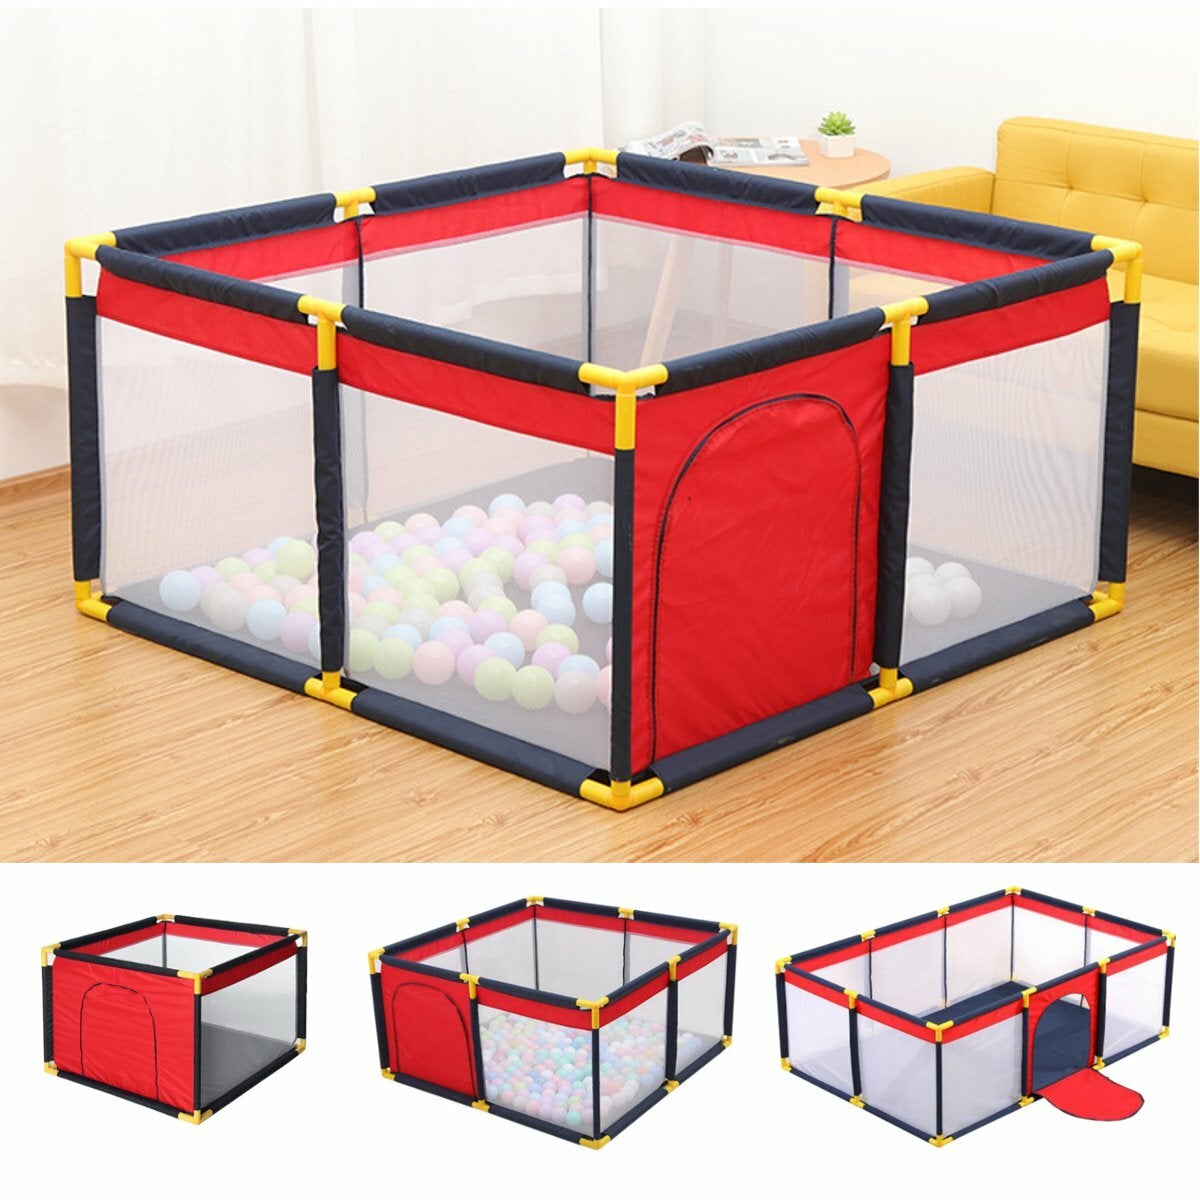 Childrens Play Fence Baby Safety Fence Foldable Fence Childrens Indoor Fence Toys